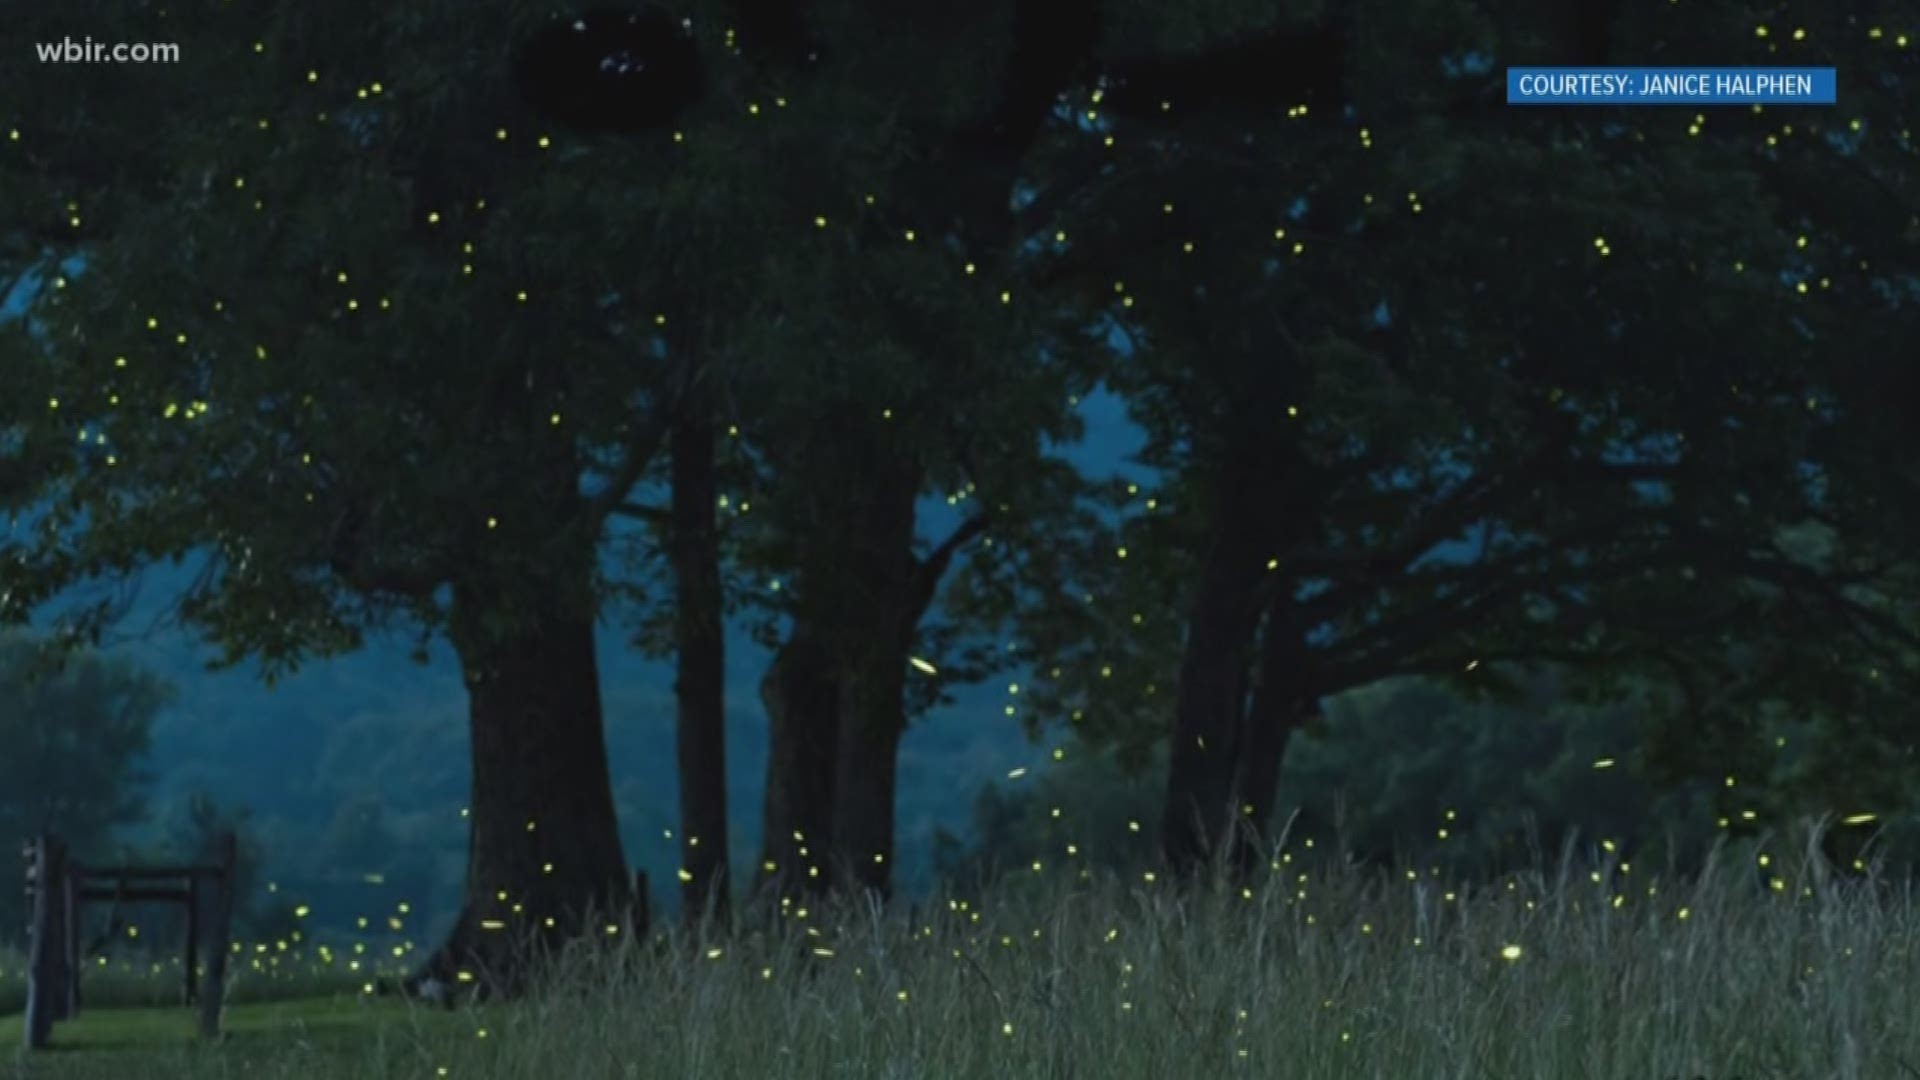 Hundreds of people are traveling to the Smokies this week to see the synchronous fireflies there.